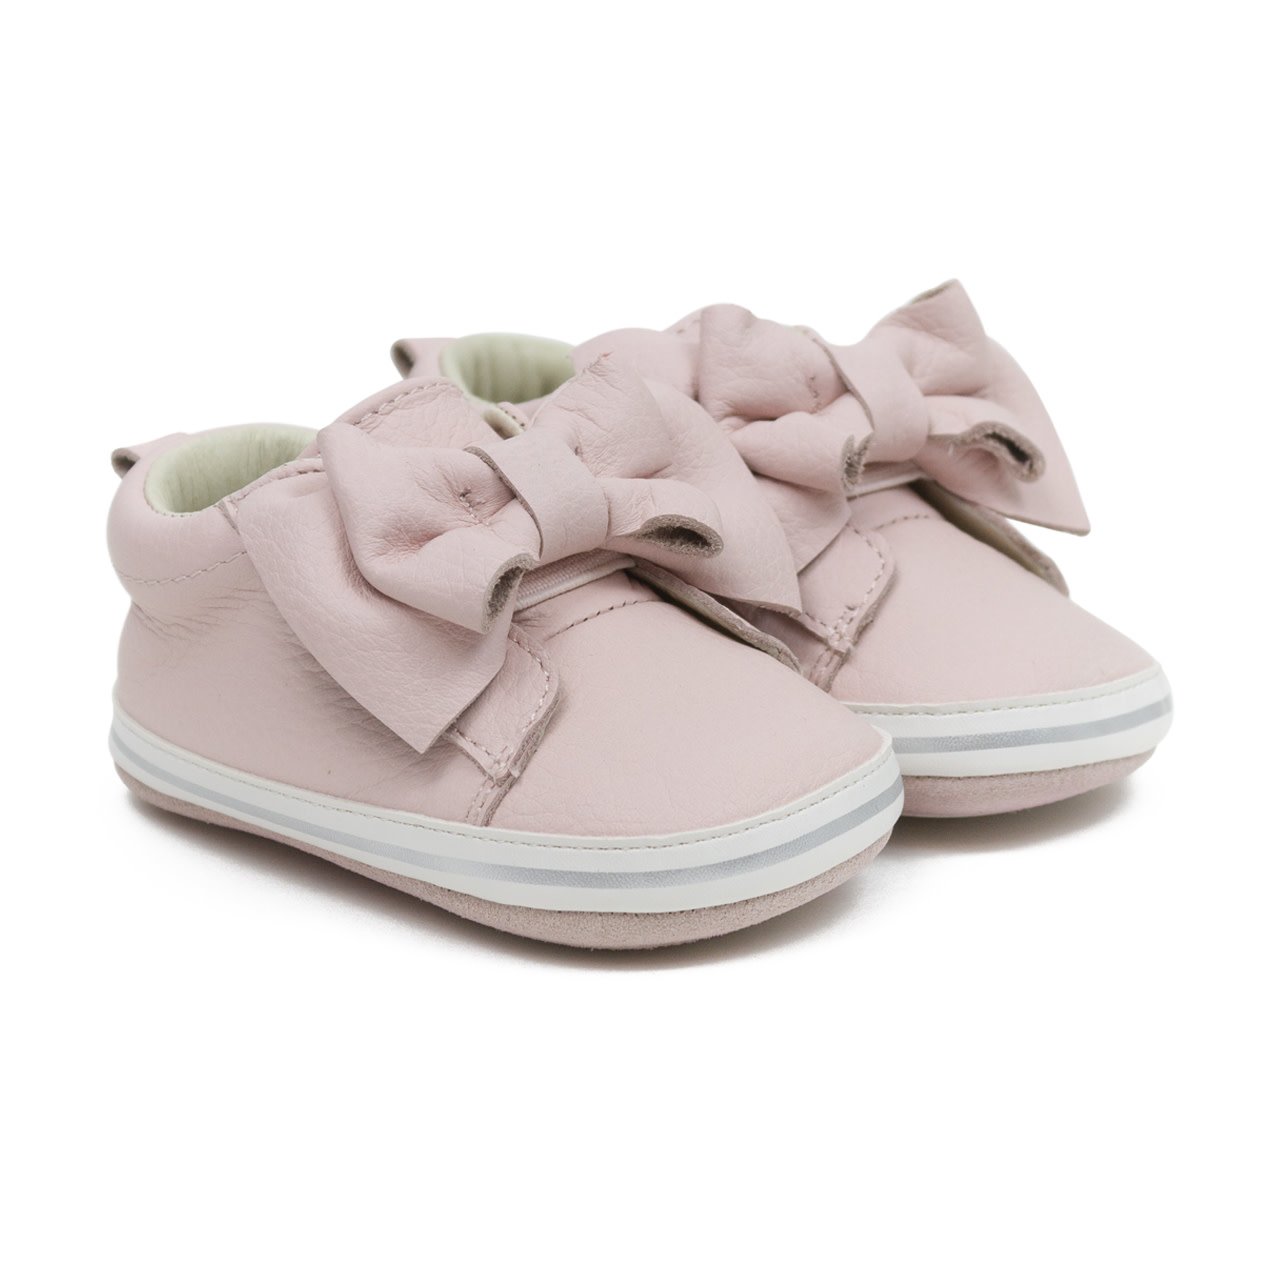 Robeez Girl's Soft Soled Shoes